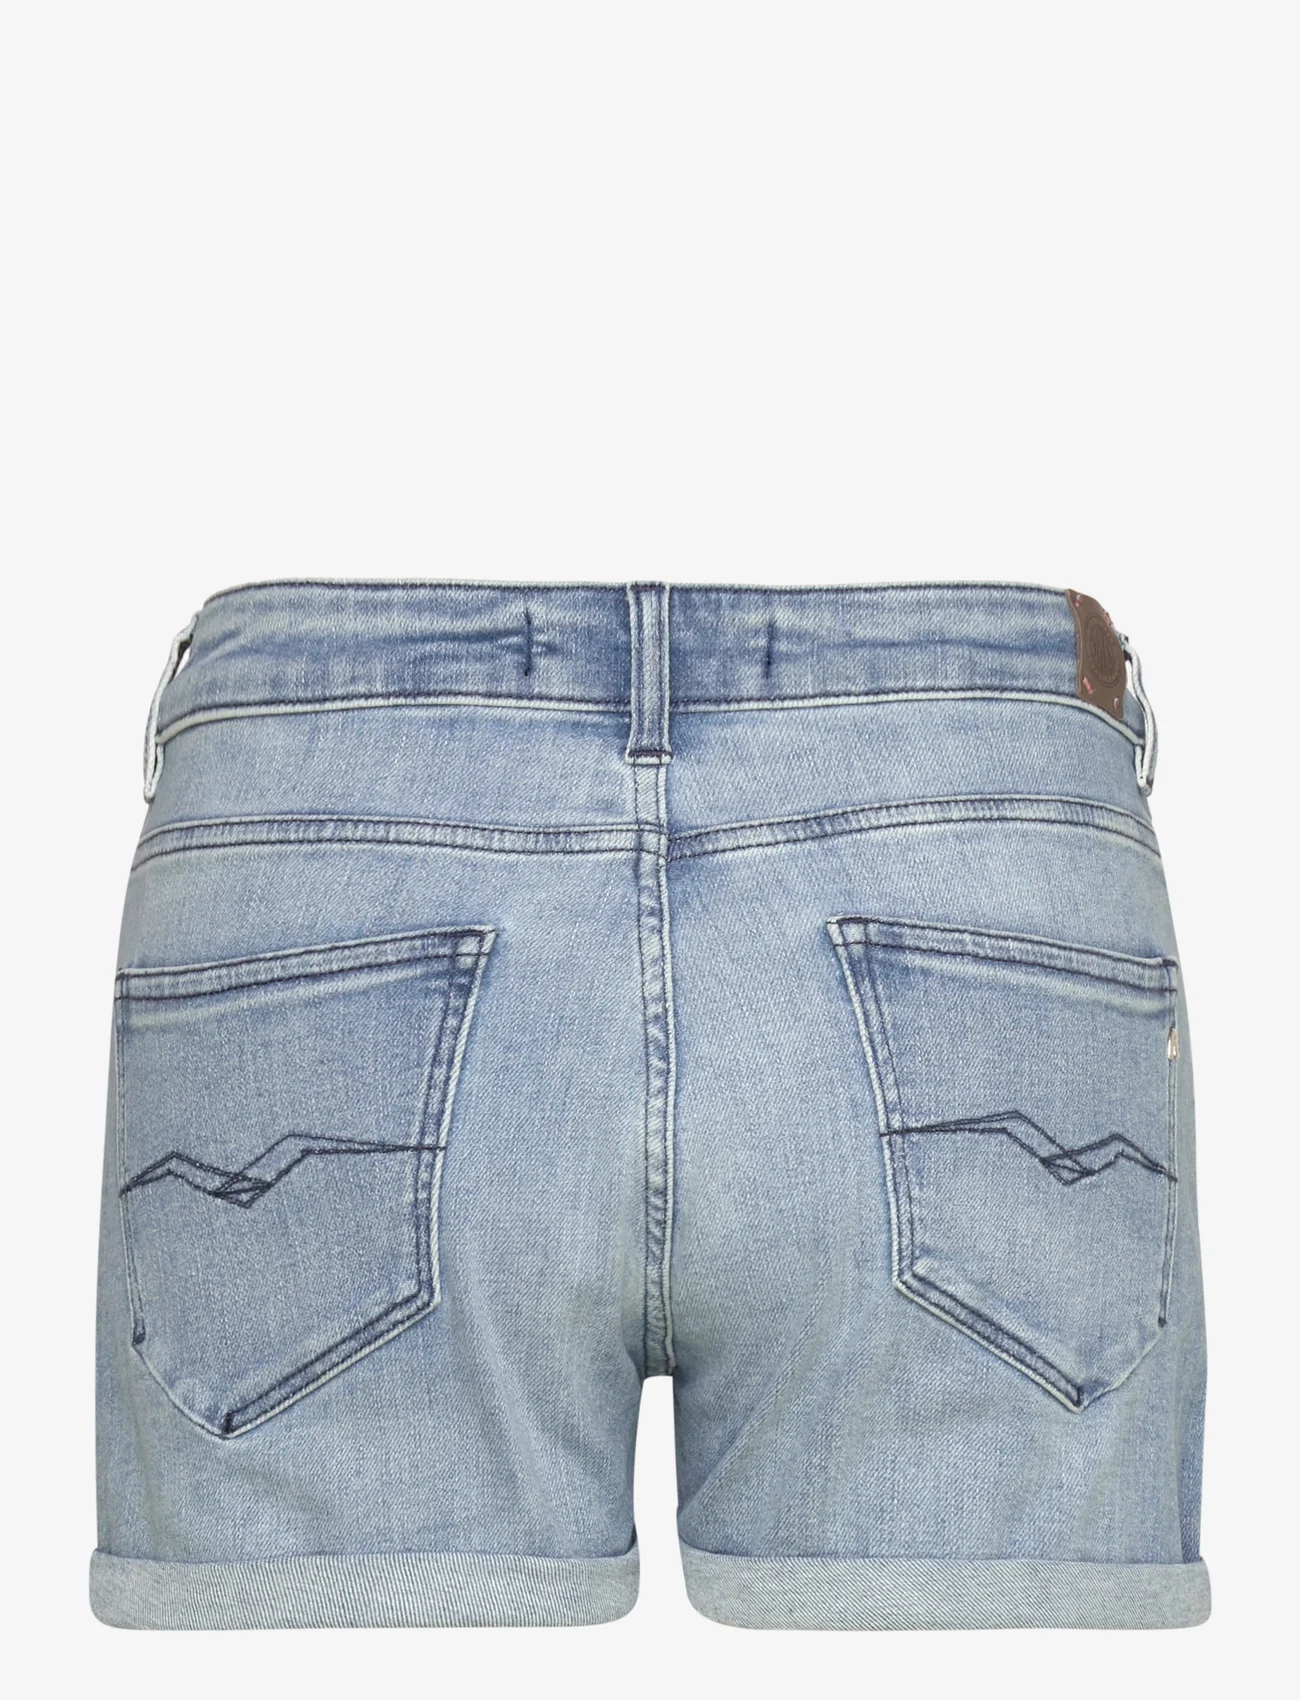 Replay - ANYTA Shorts  C-Stretch - jeansshorts - blue - 1